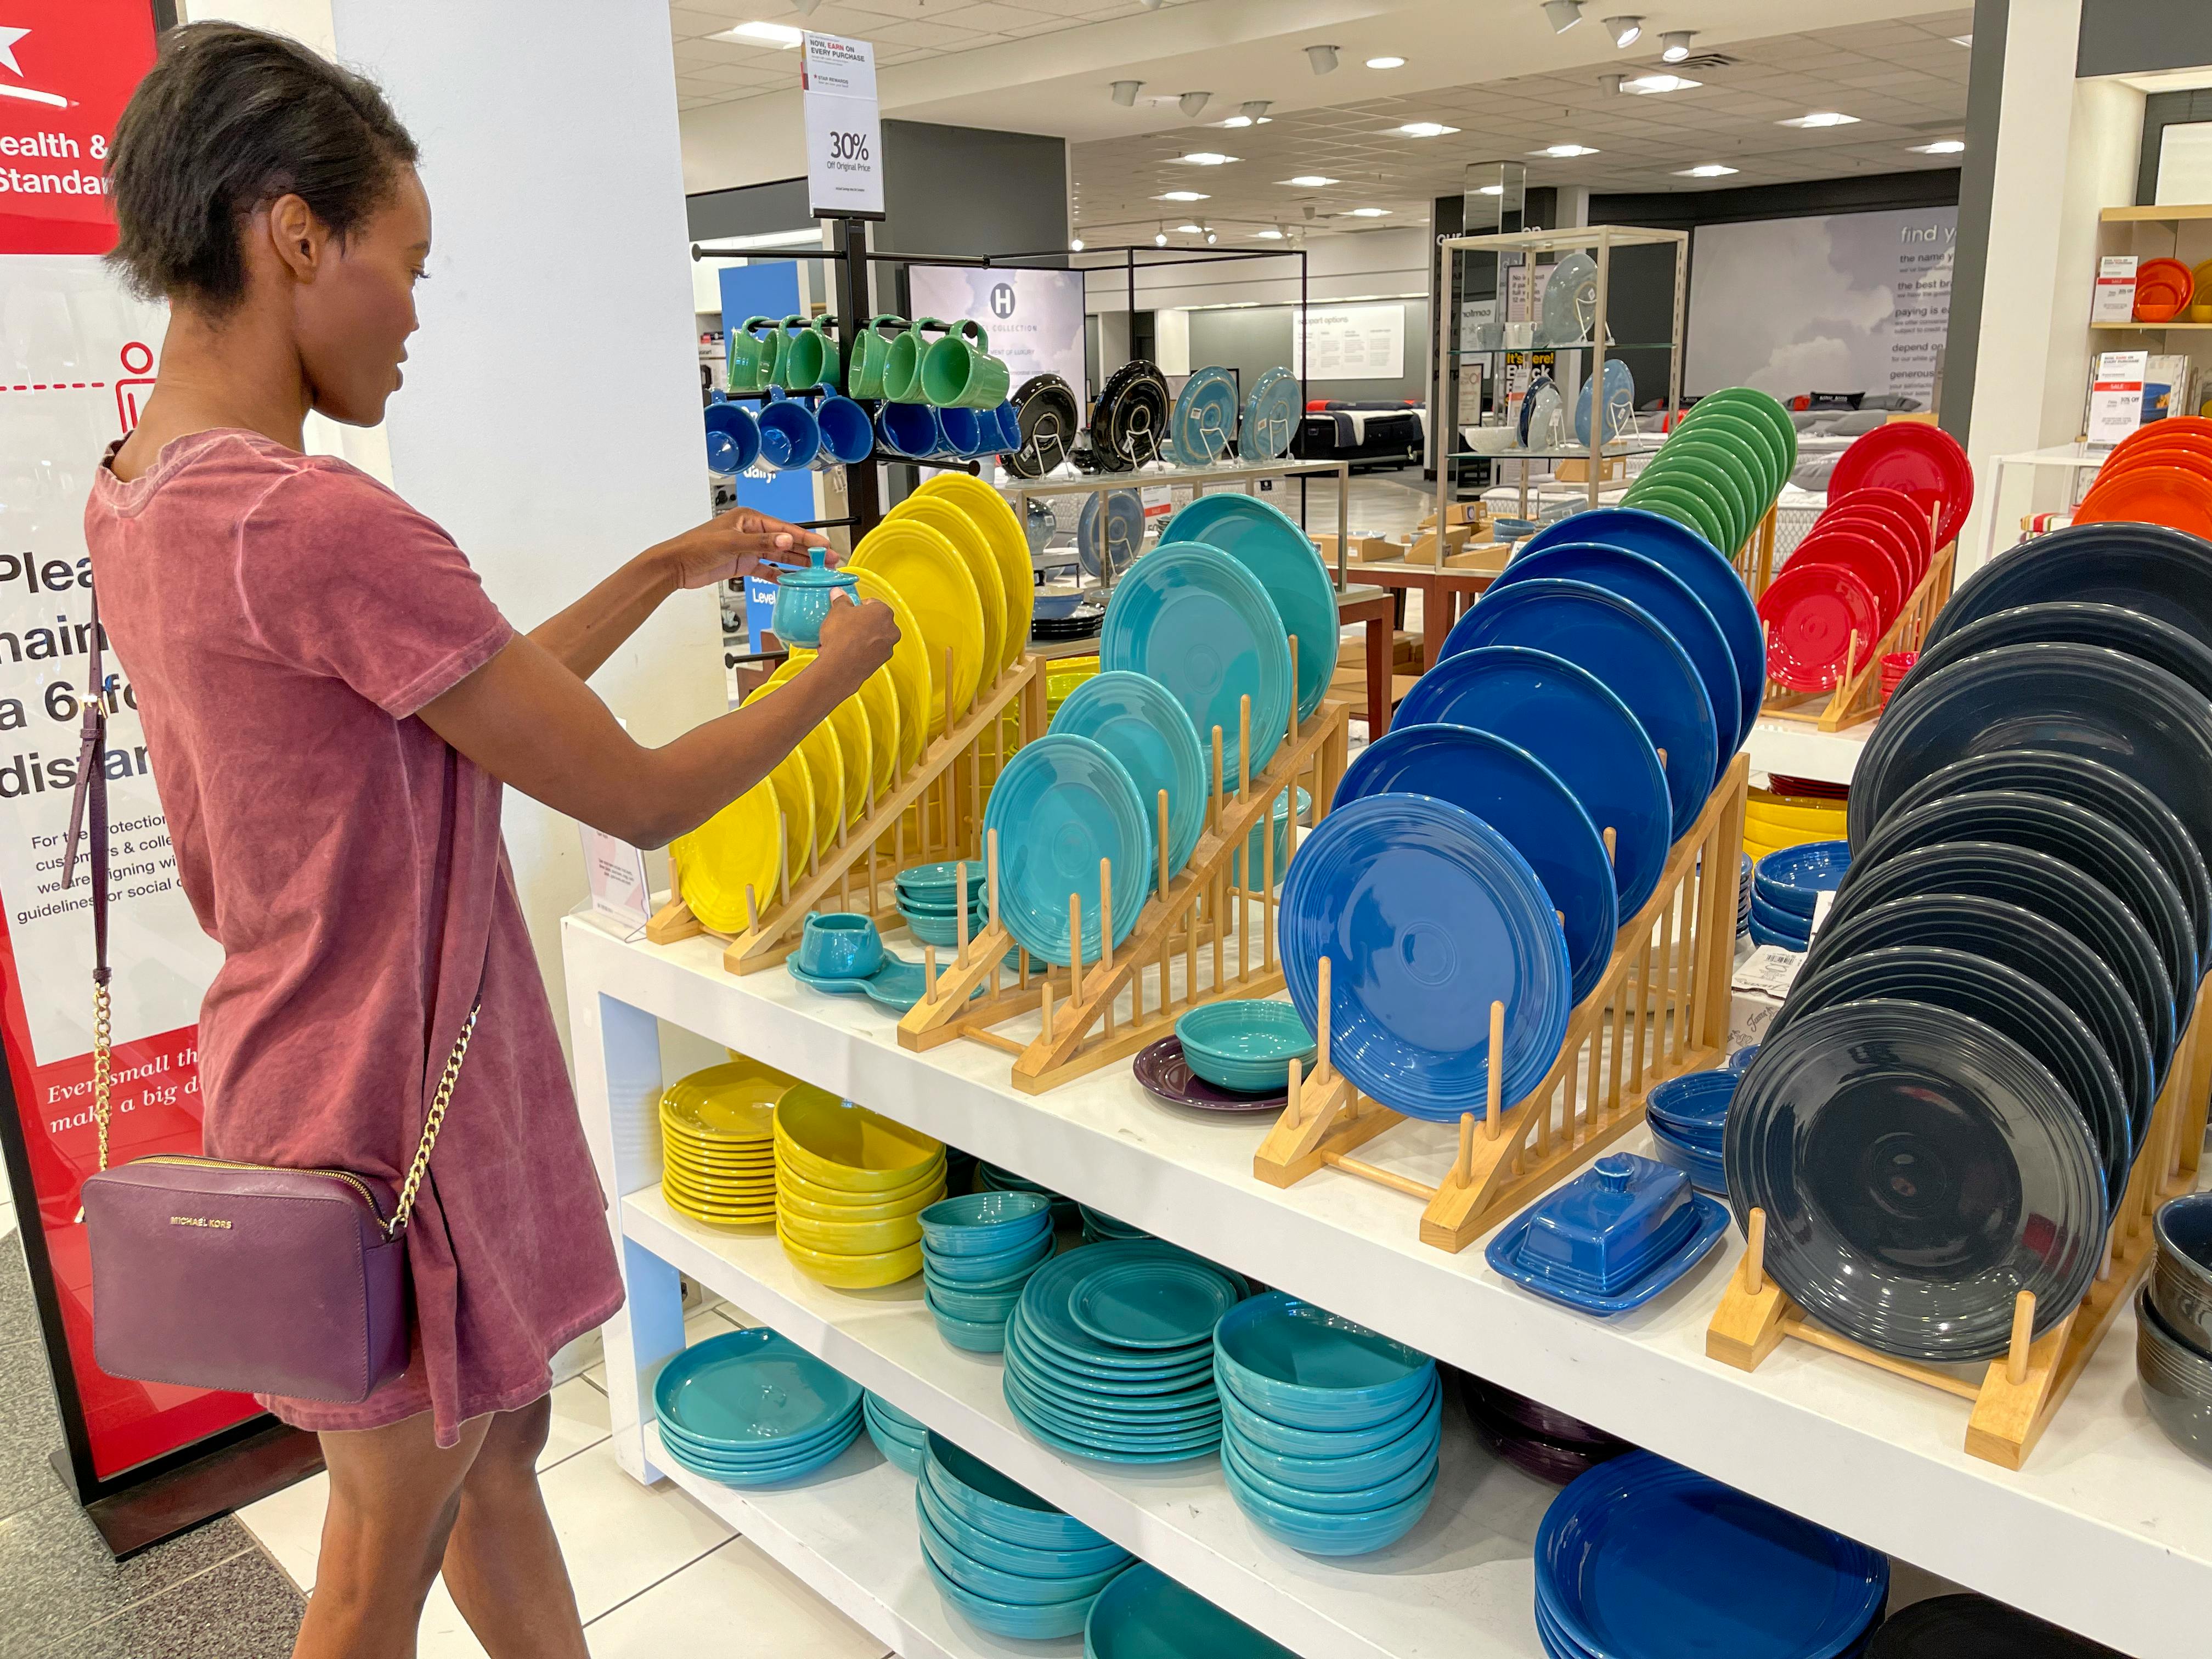 A person shopping for dishes in Macy's